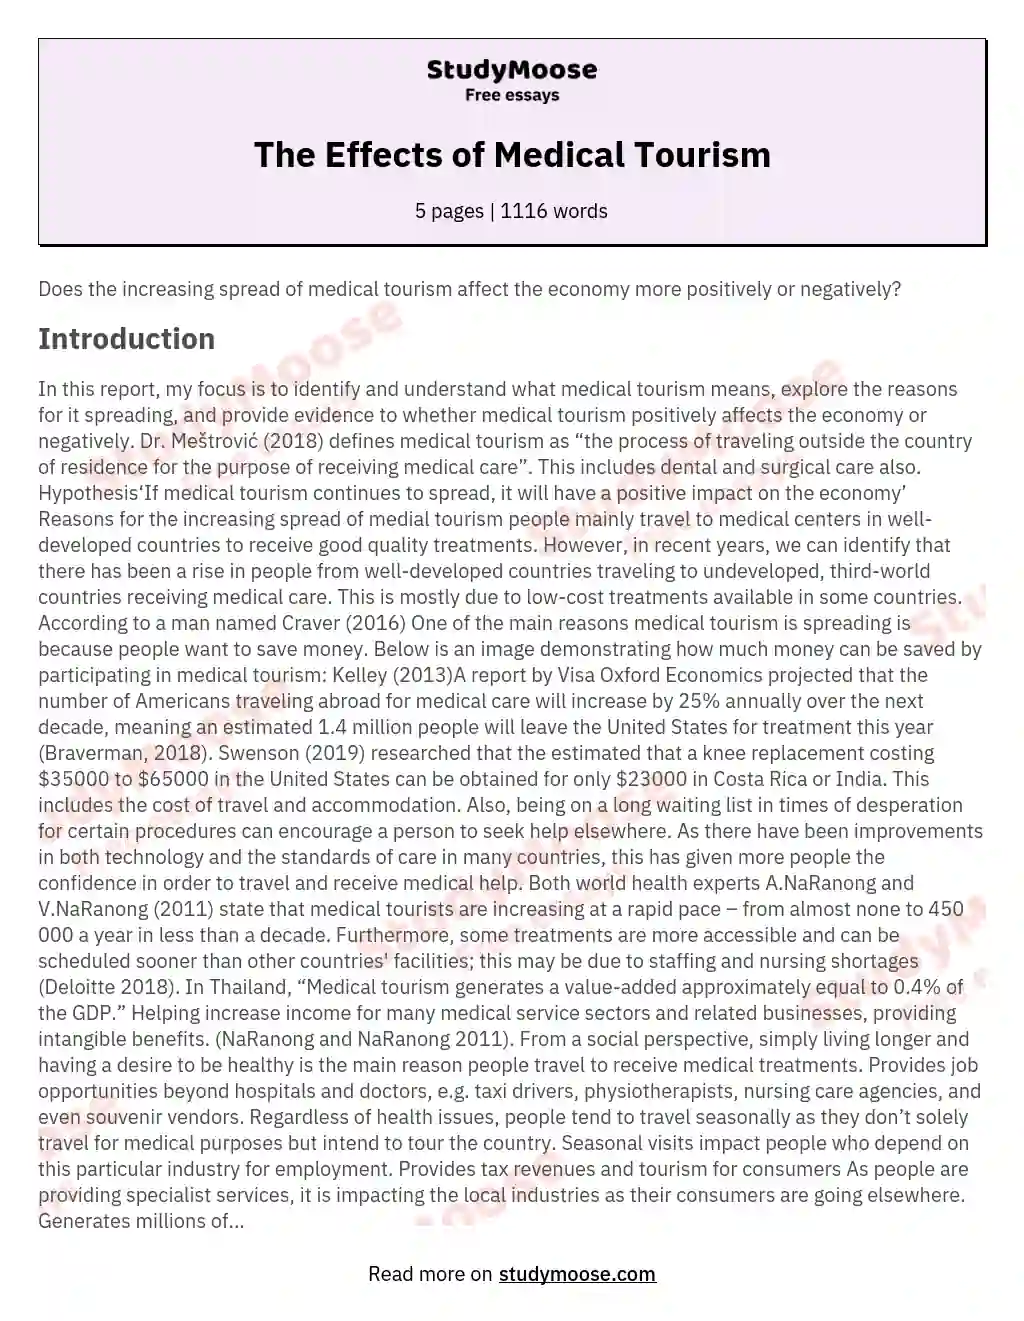 The Effects of Medical Tourism essay